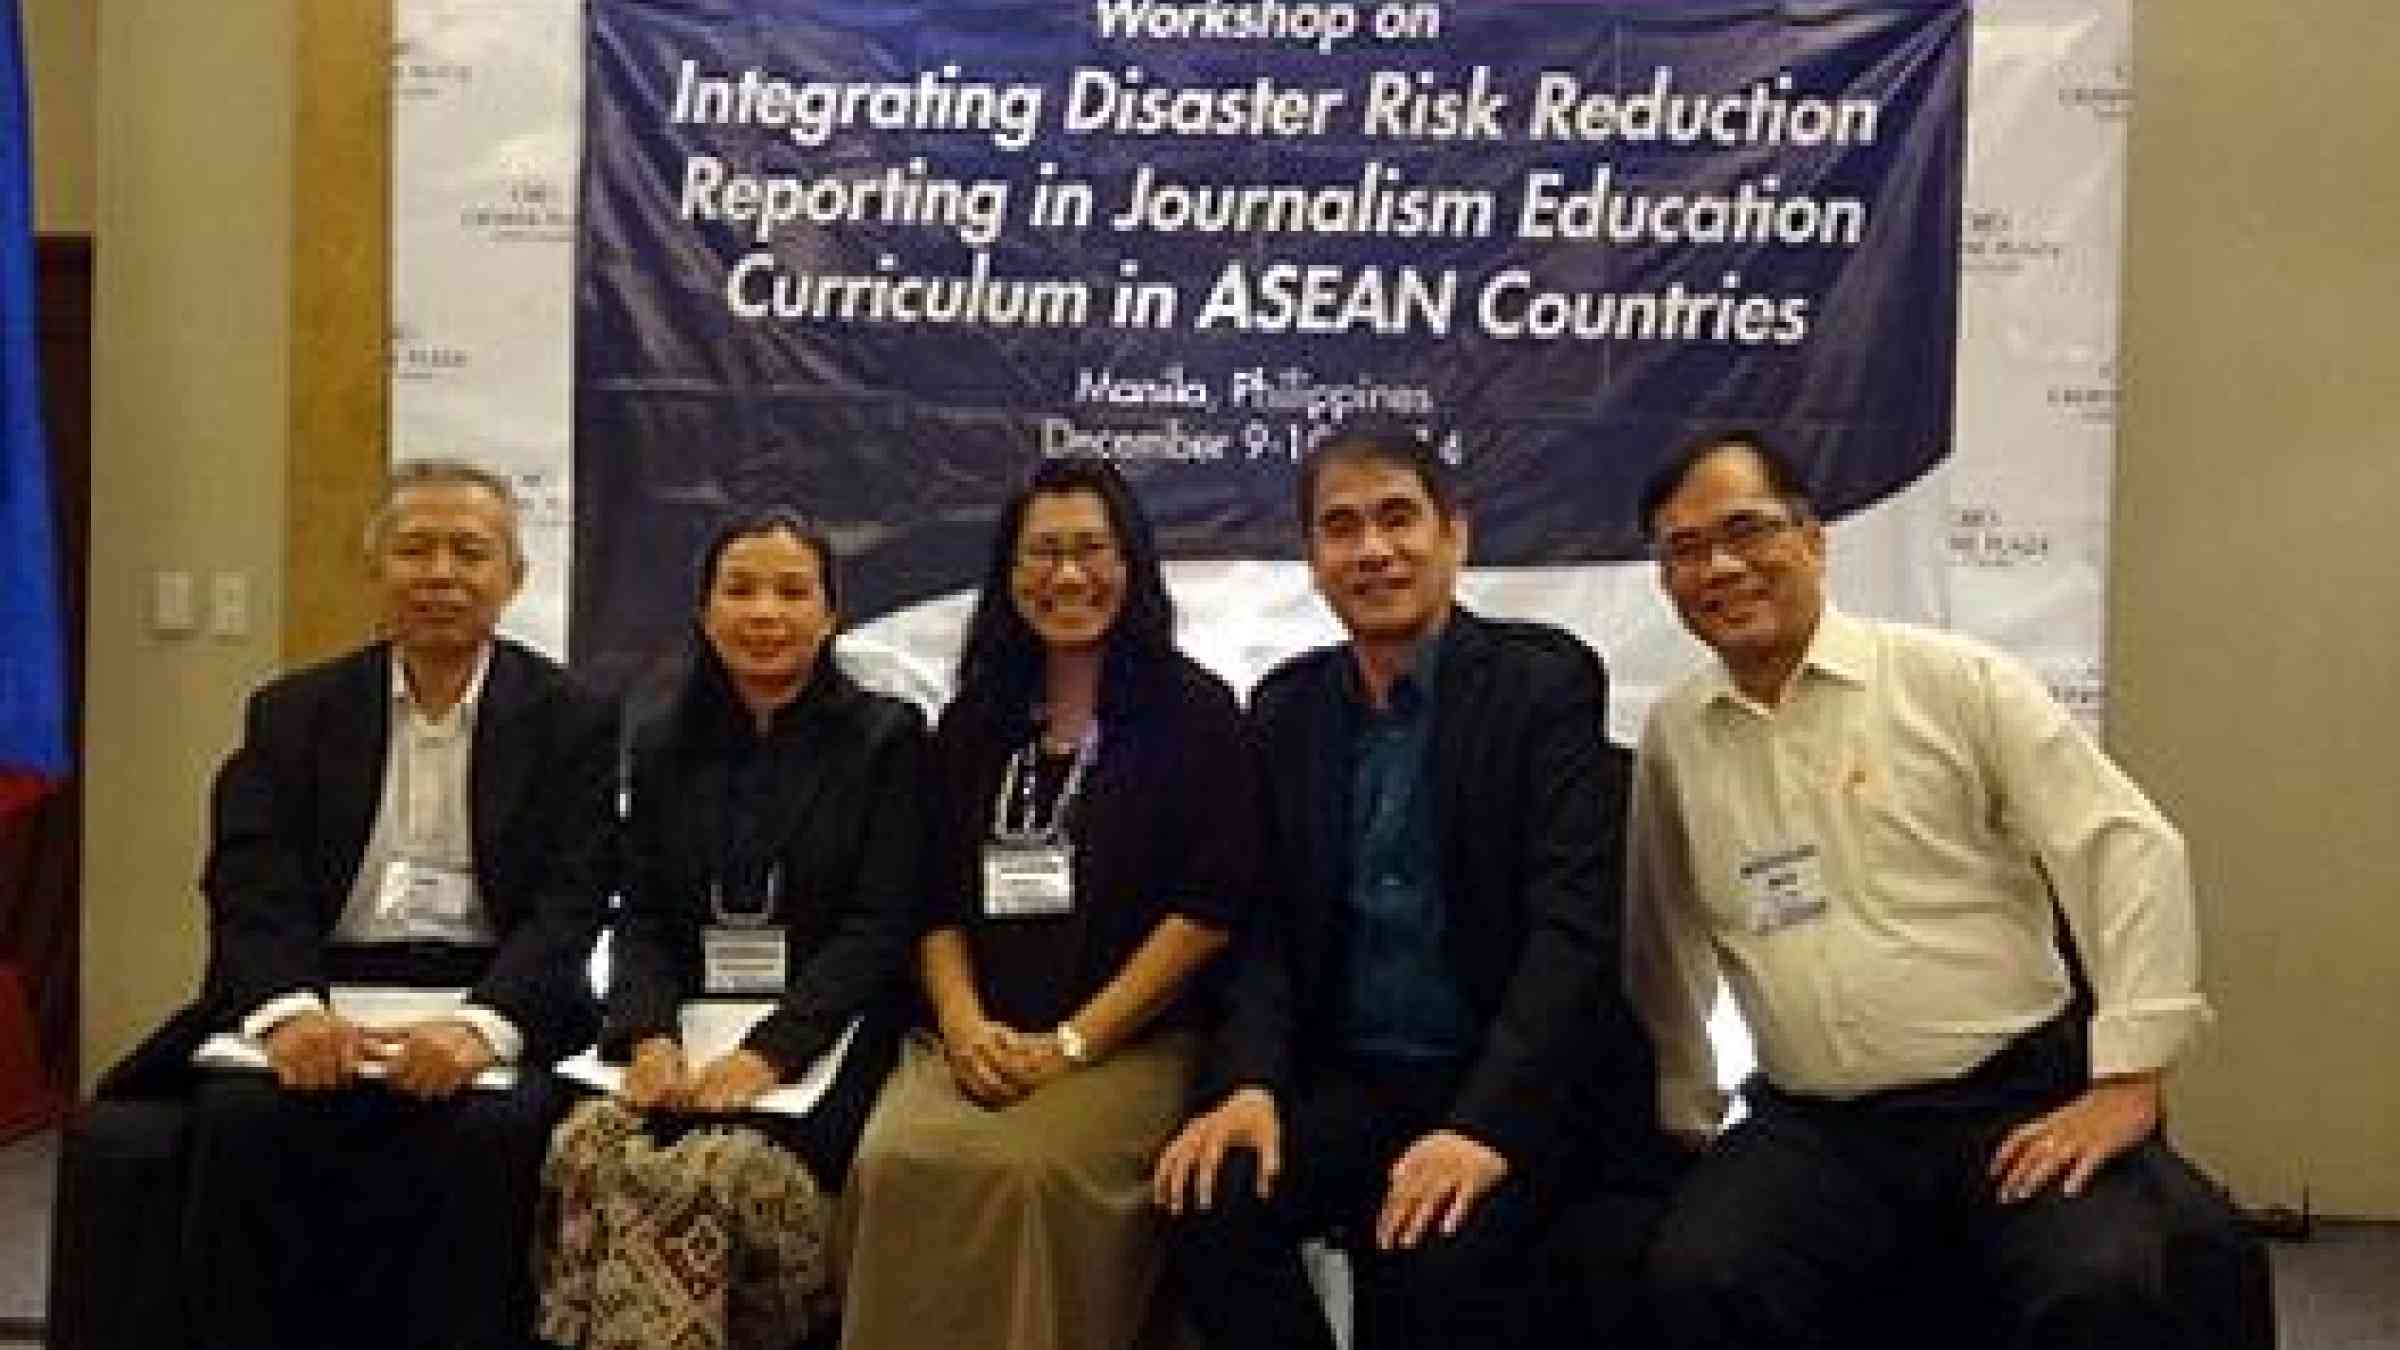 Attendants at the Manila workshop on integrating DRR into journalism education which concluded today: Zulkarimein Nasulton from Indonesia, Phensisanavong Hommala from Lao PR, Supaporn Phokaew from Thailand, Ramon Tuazon and Ben Domingo from the Philippines. (Photo: UNISDR)